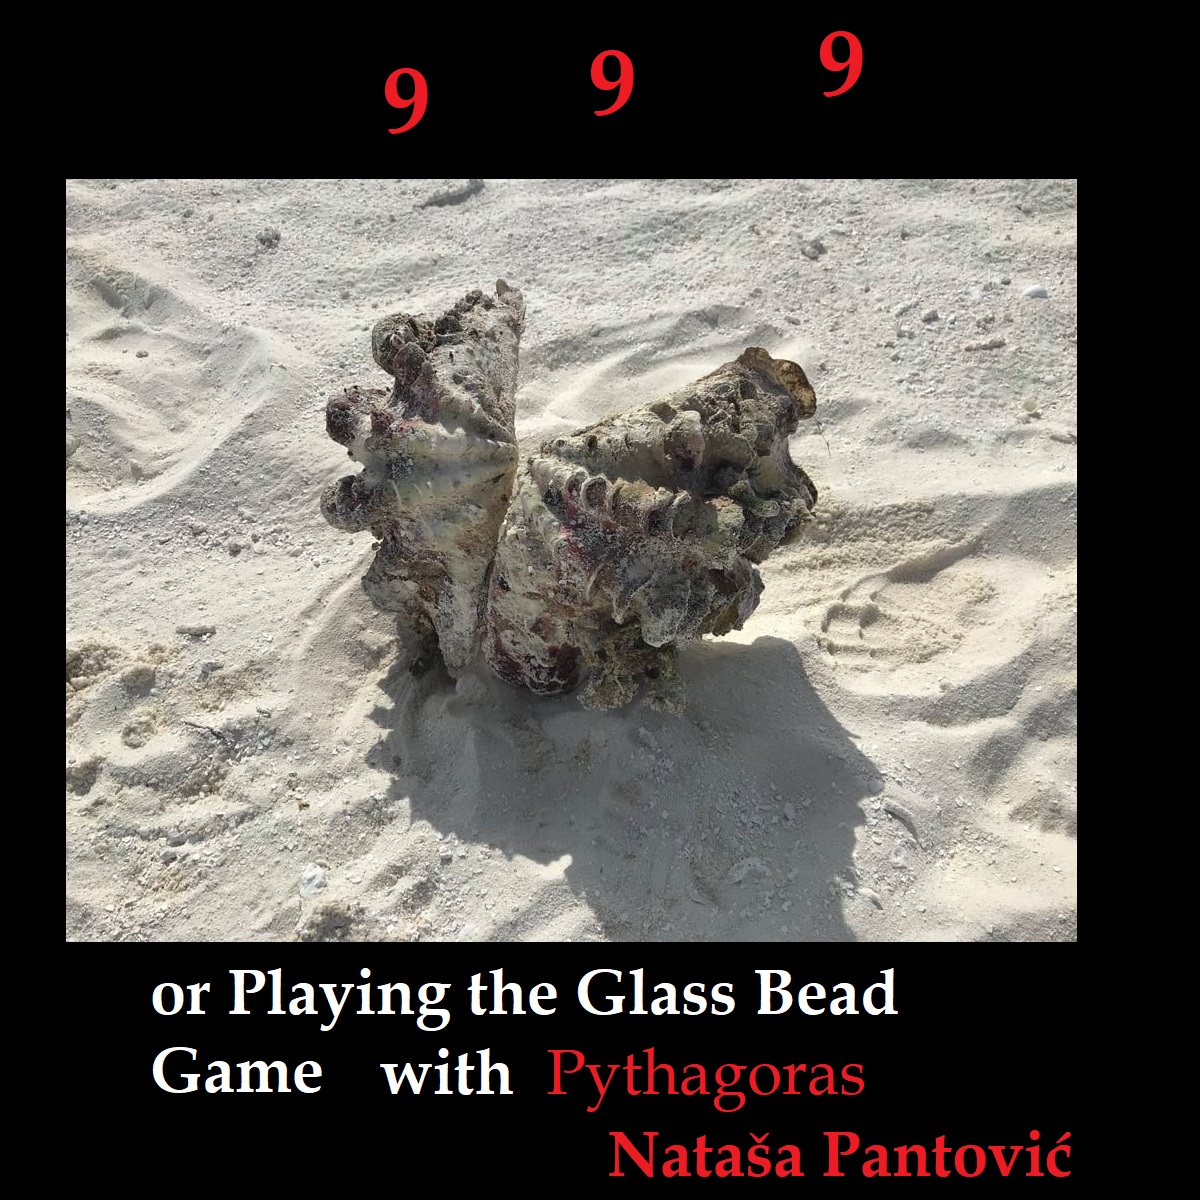 999 Playing the Glass Bead Game with Pythagoras by Natasa Pantovic hard cover with text high quality